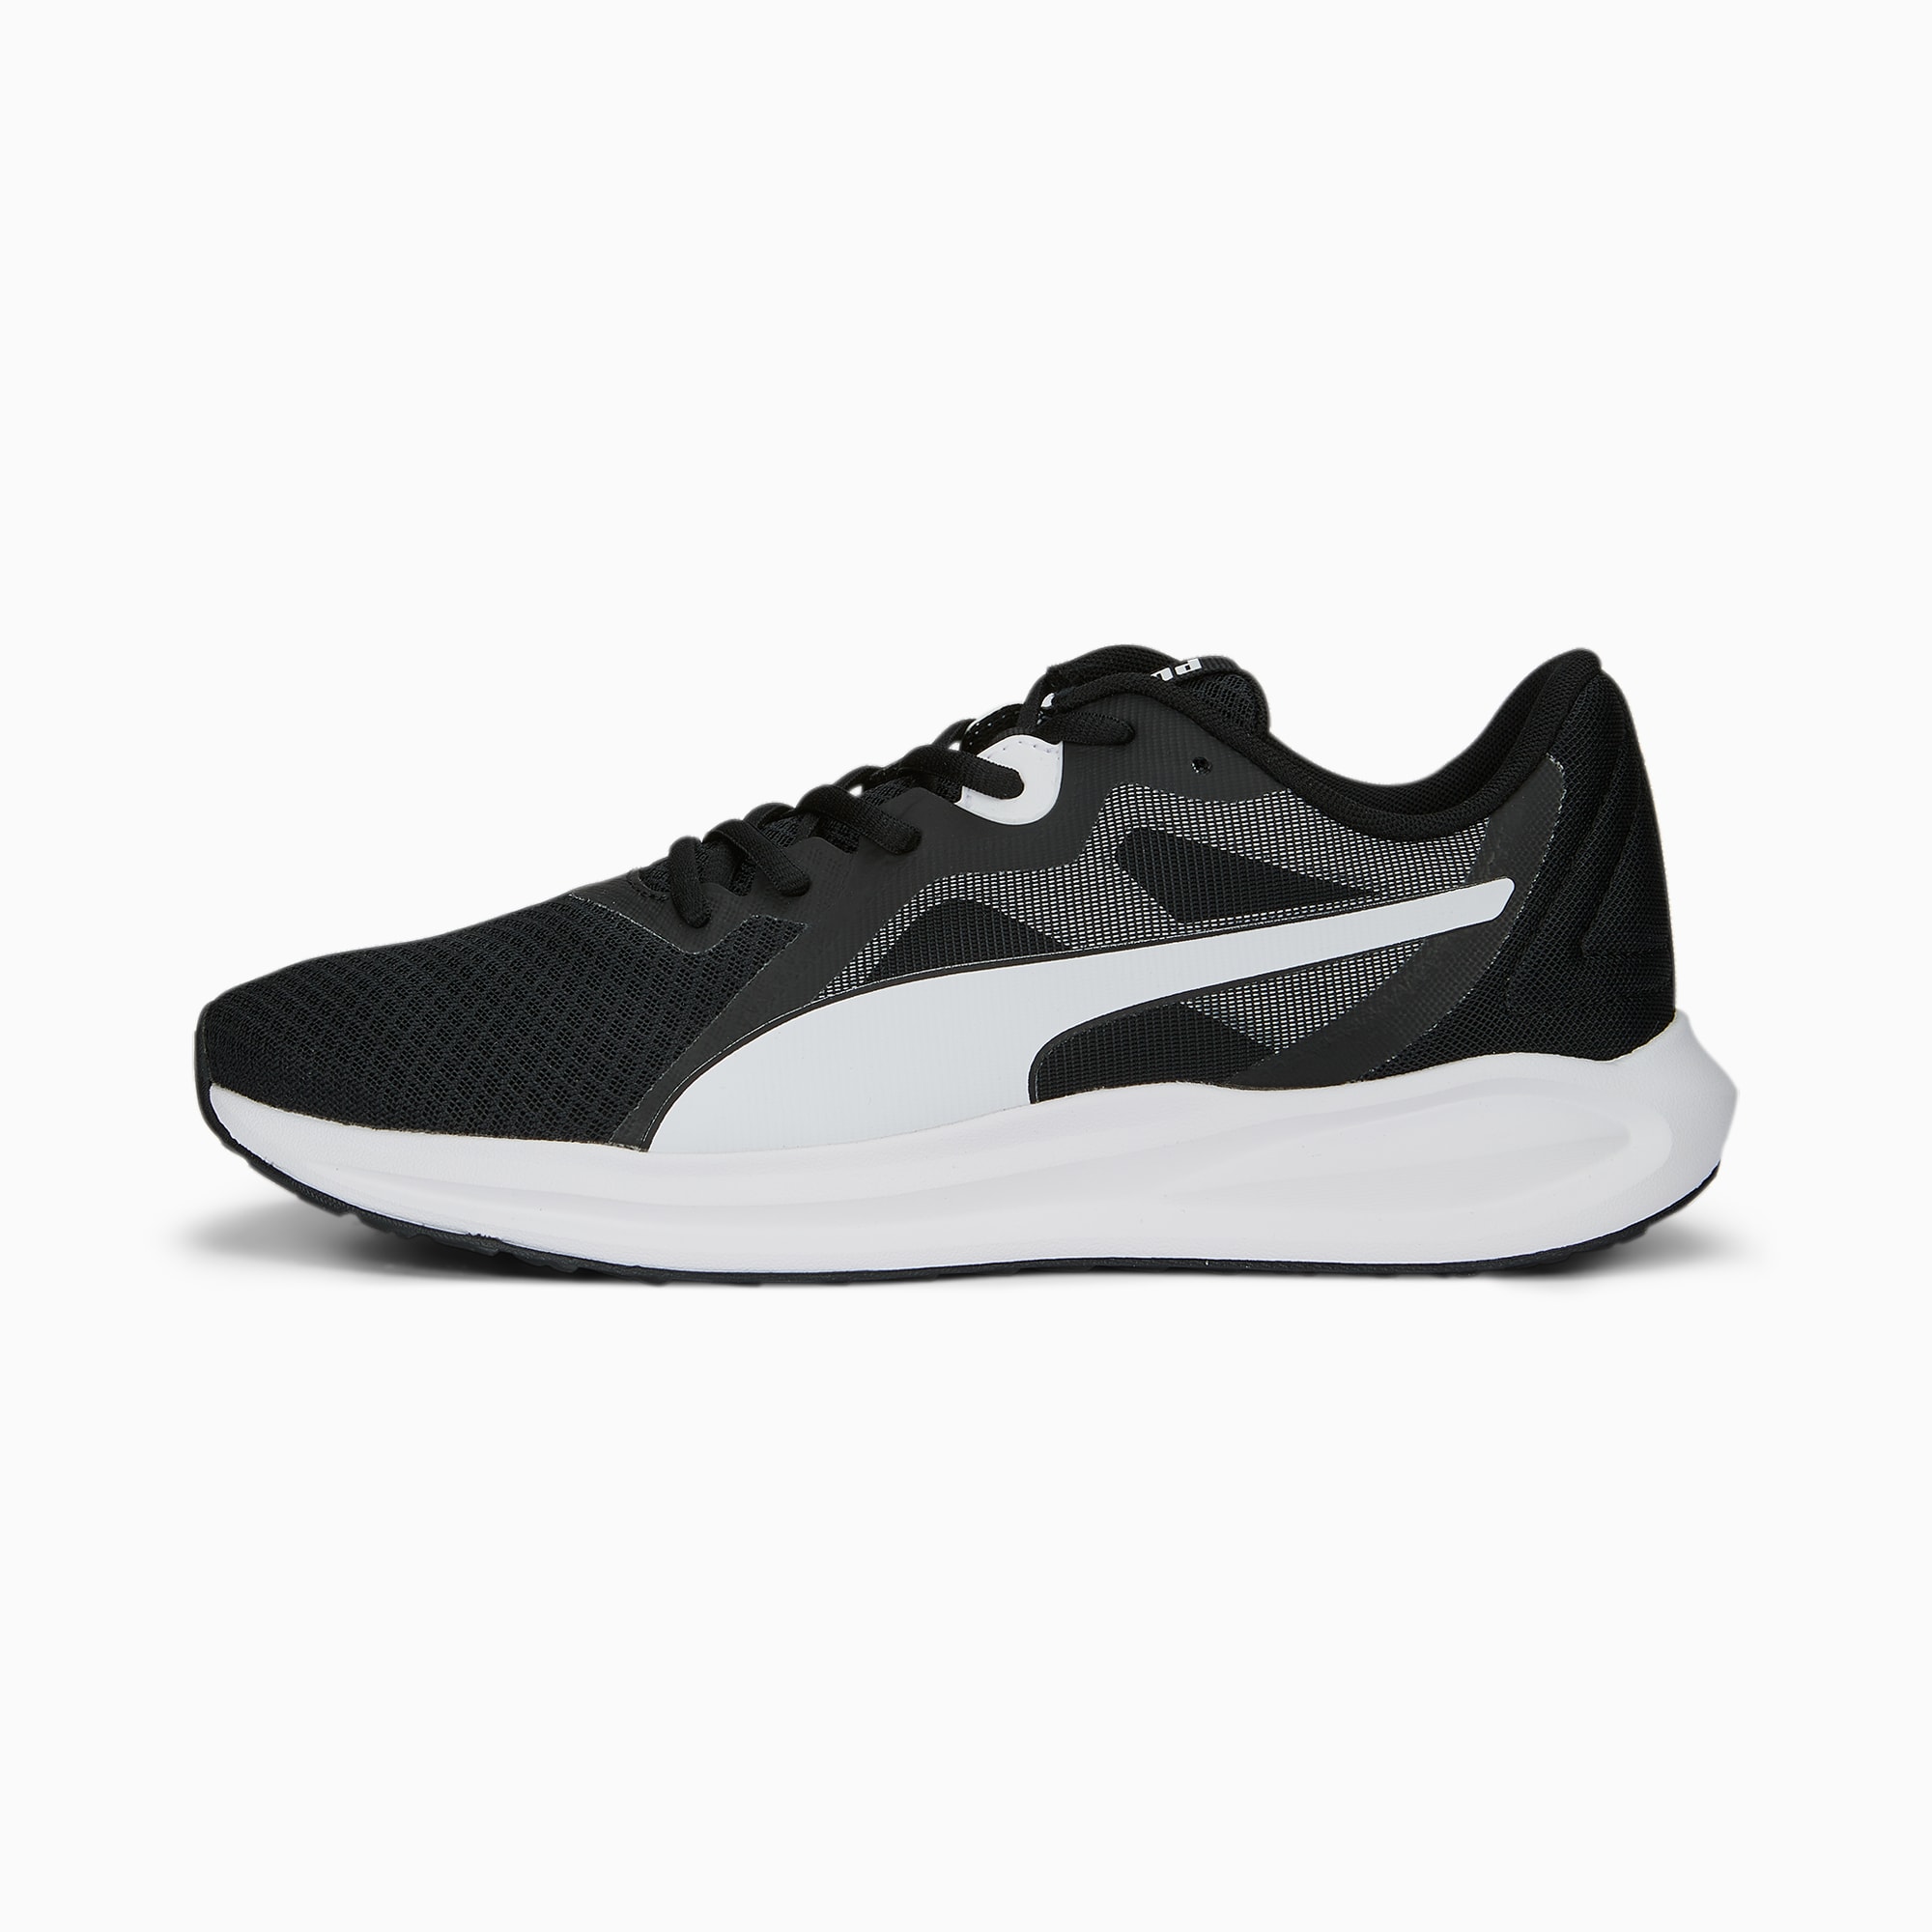 Black Puma Running Trainers | vlr.eng.br